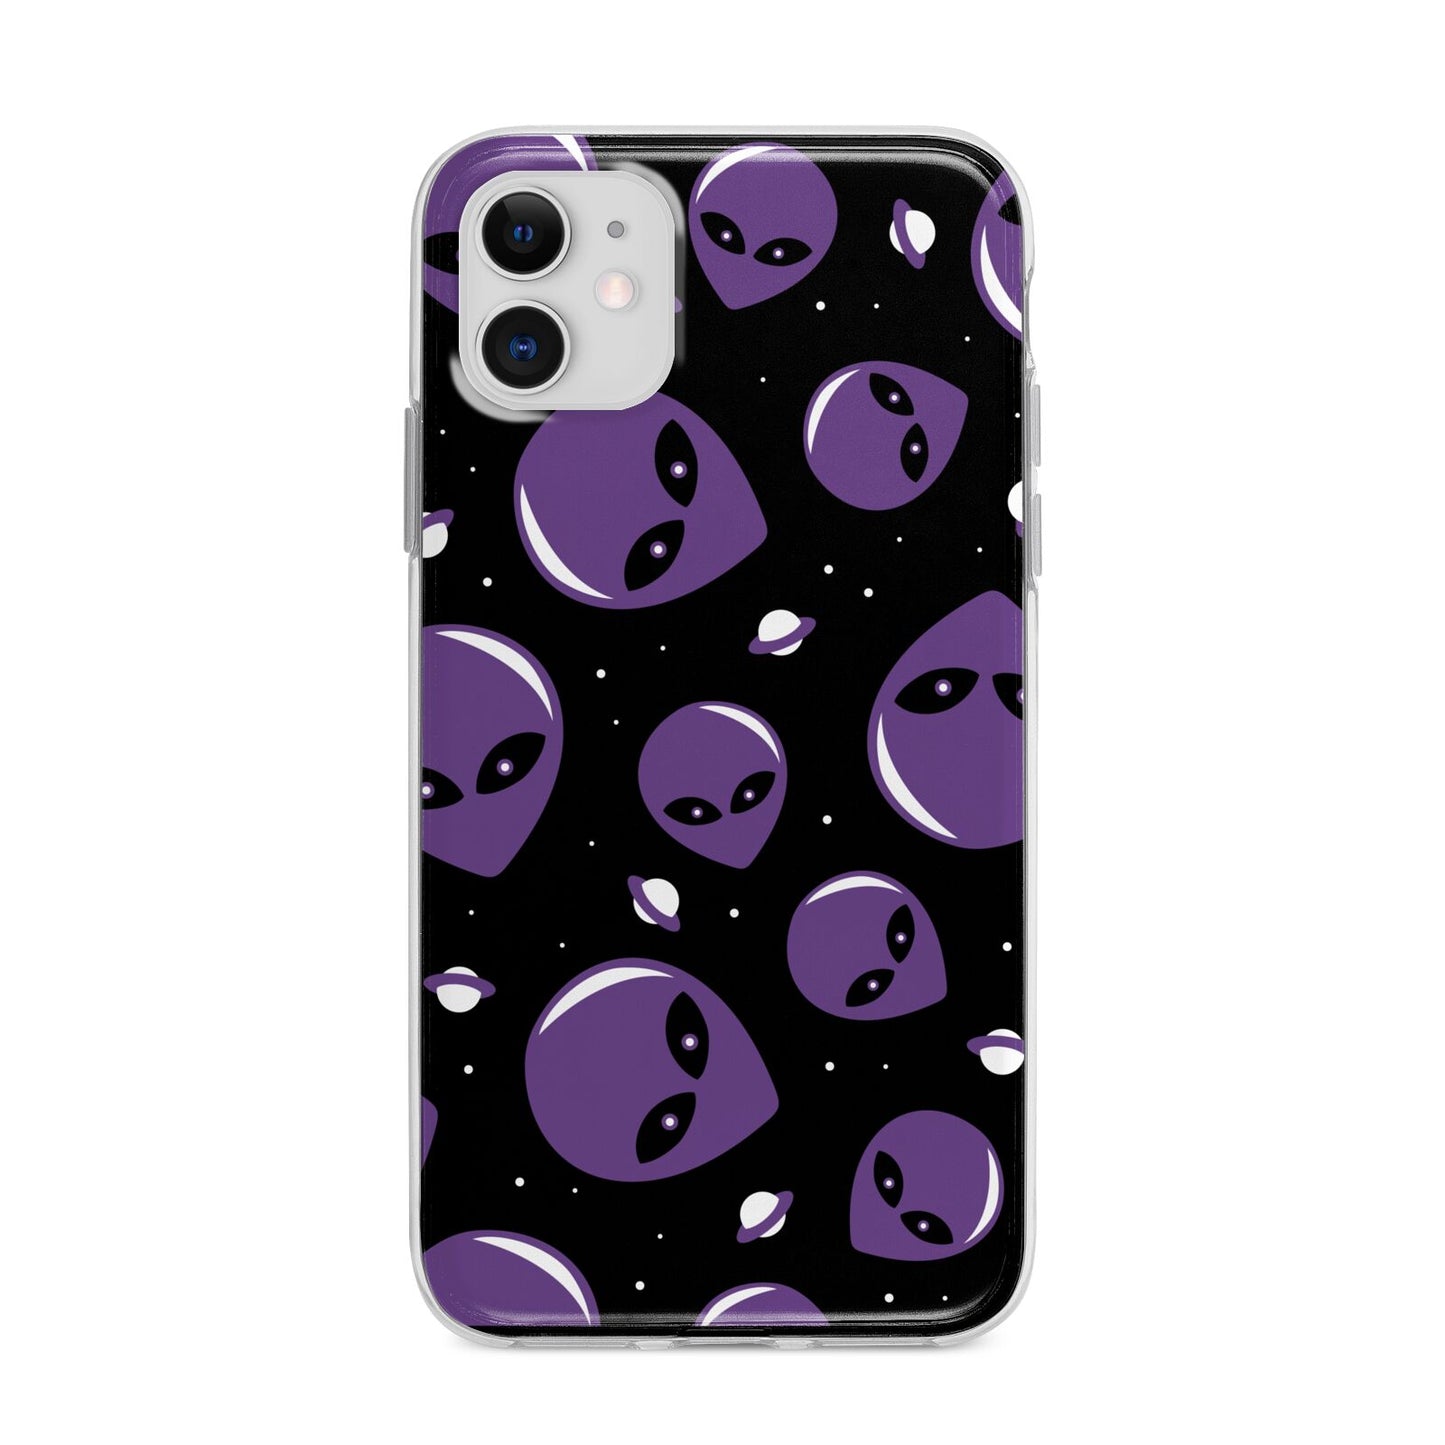 Alien Faces Apple iPhone 11 in White with Bumper Case